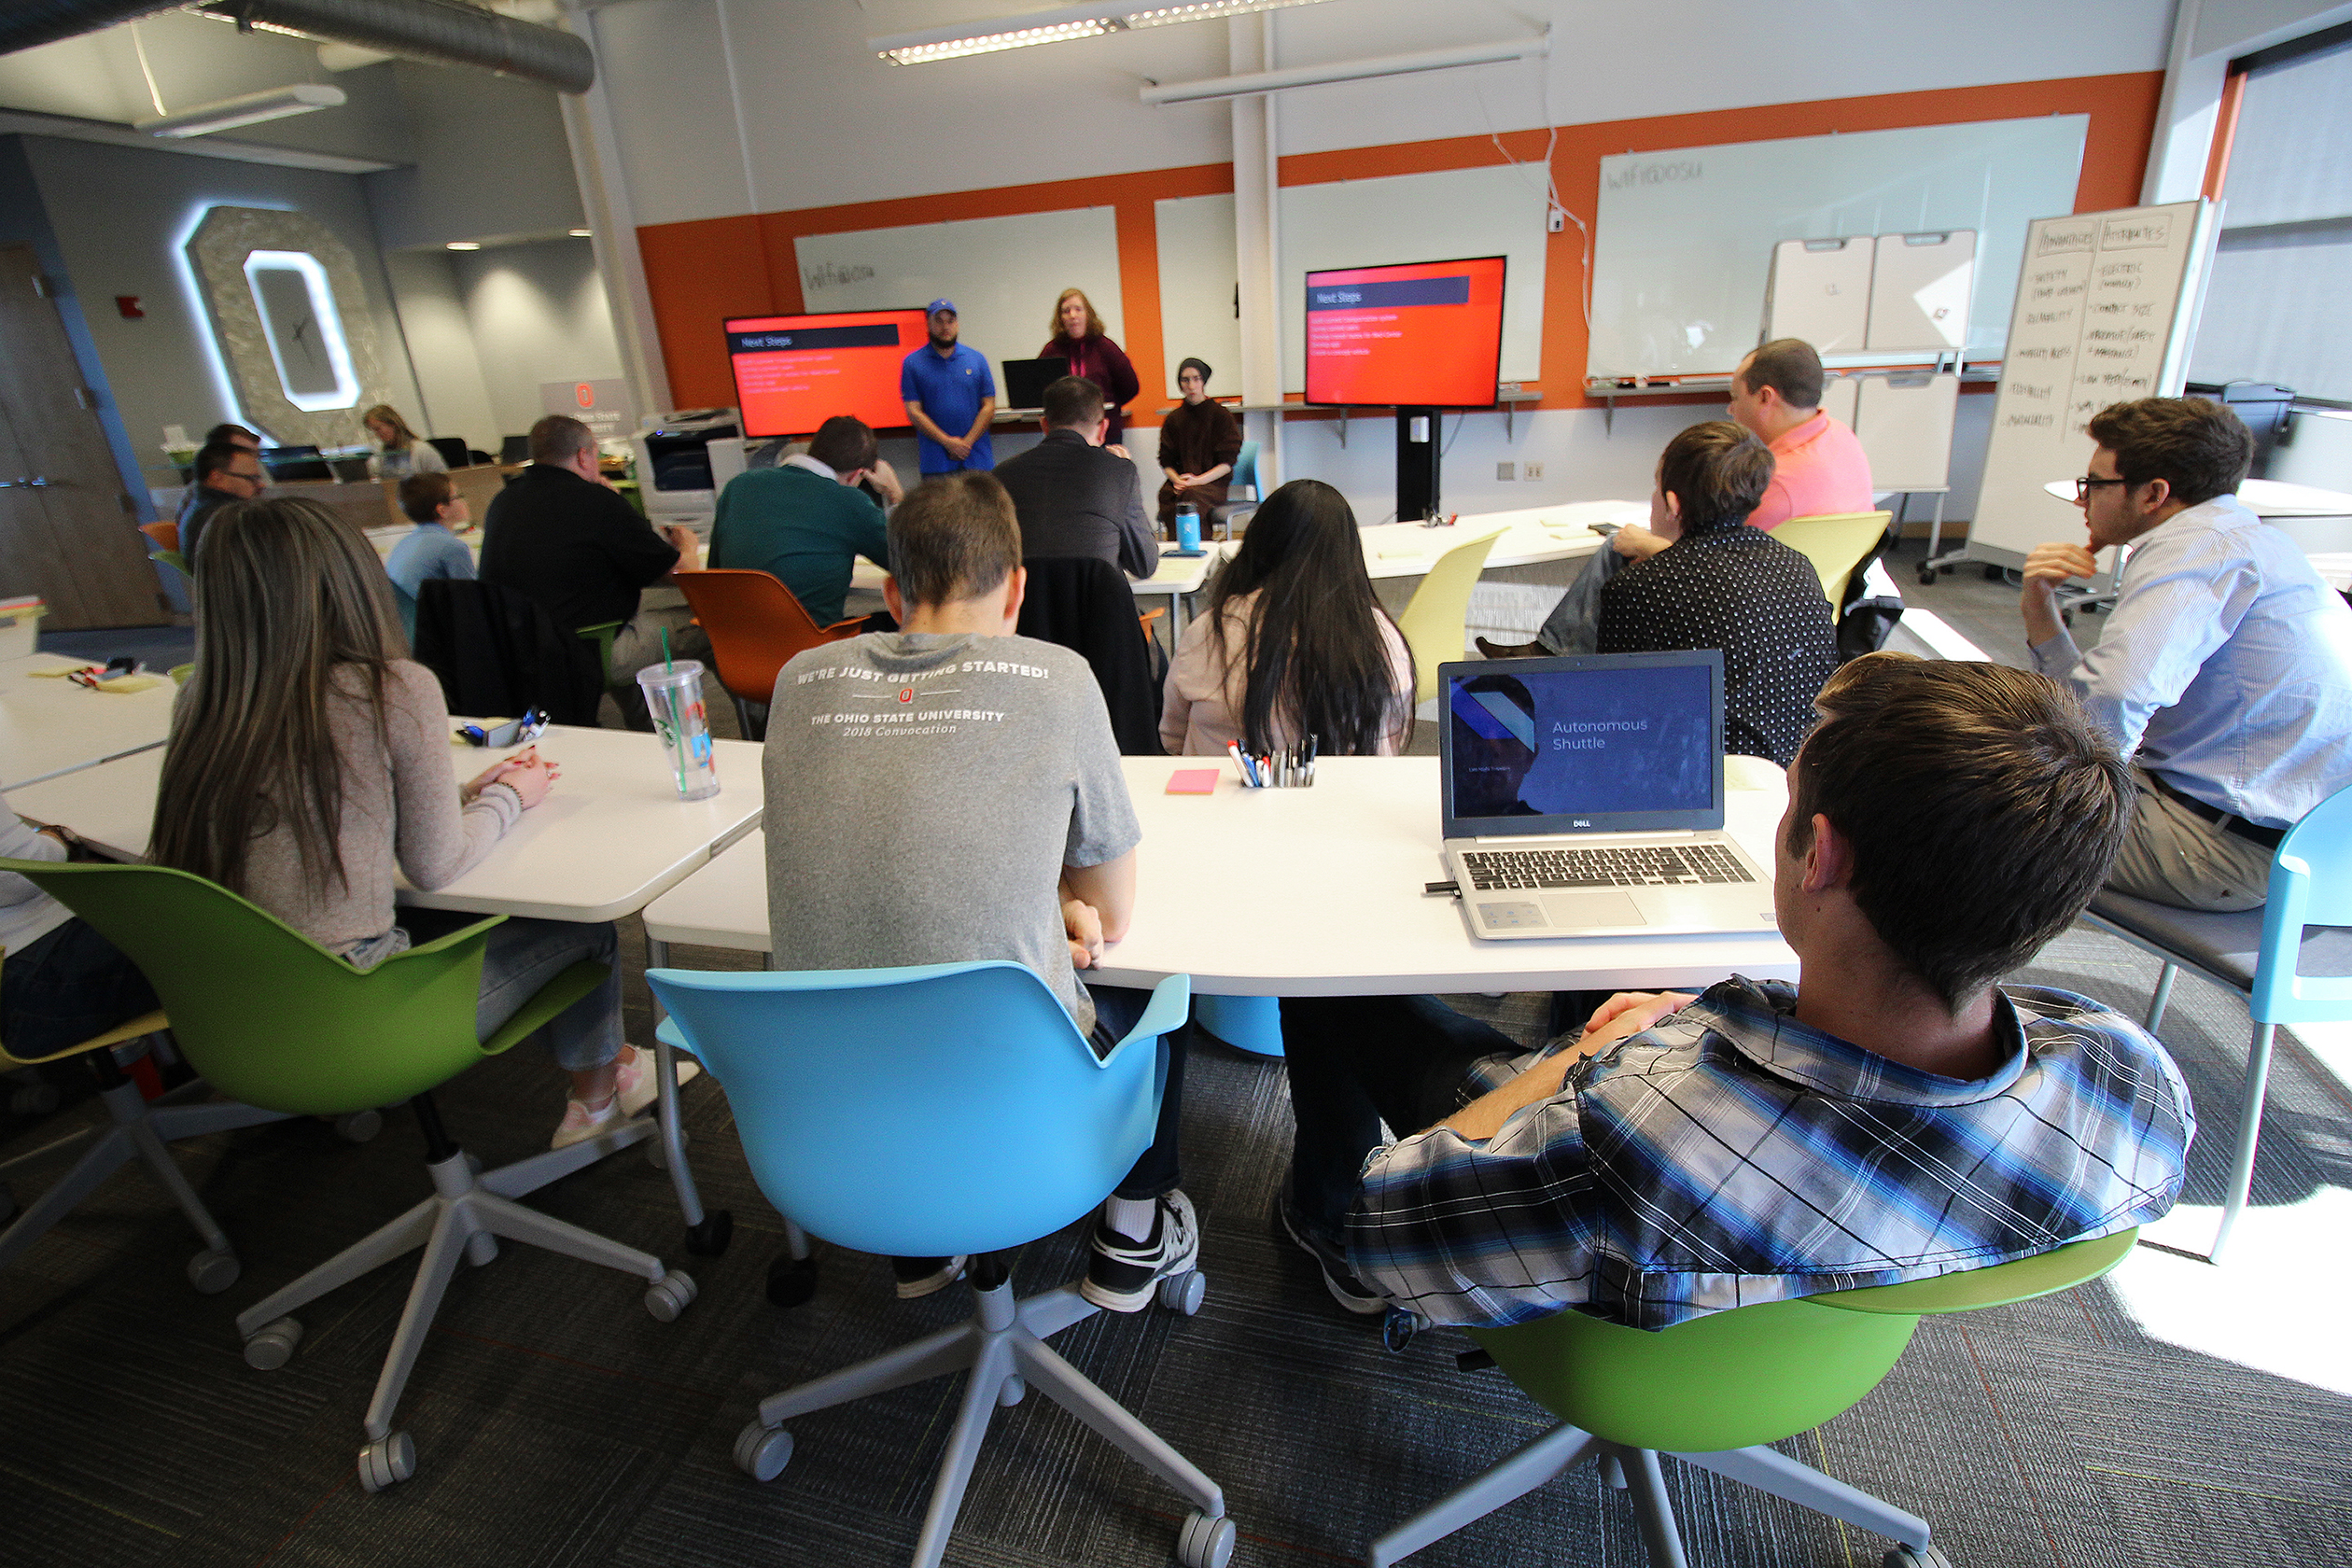 Students in the Innovation Lab listen to a presentation at an INNOVATE-O-thon event.